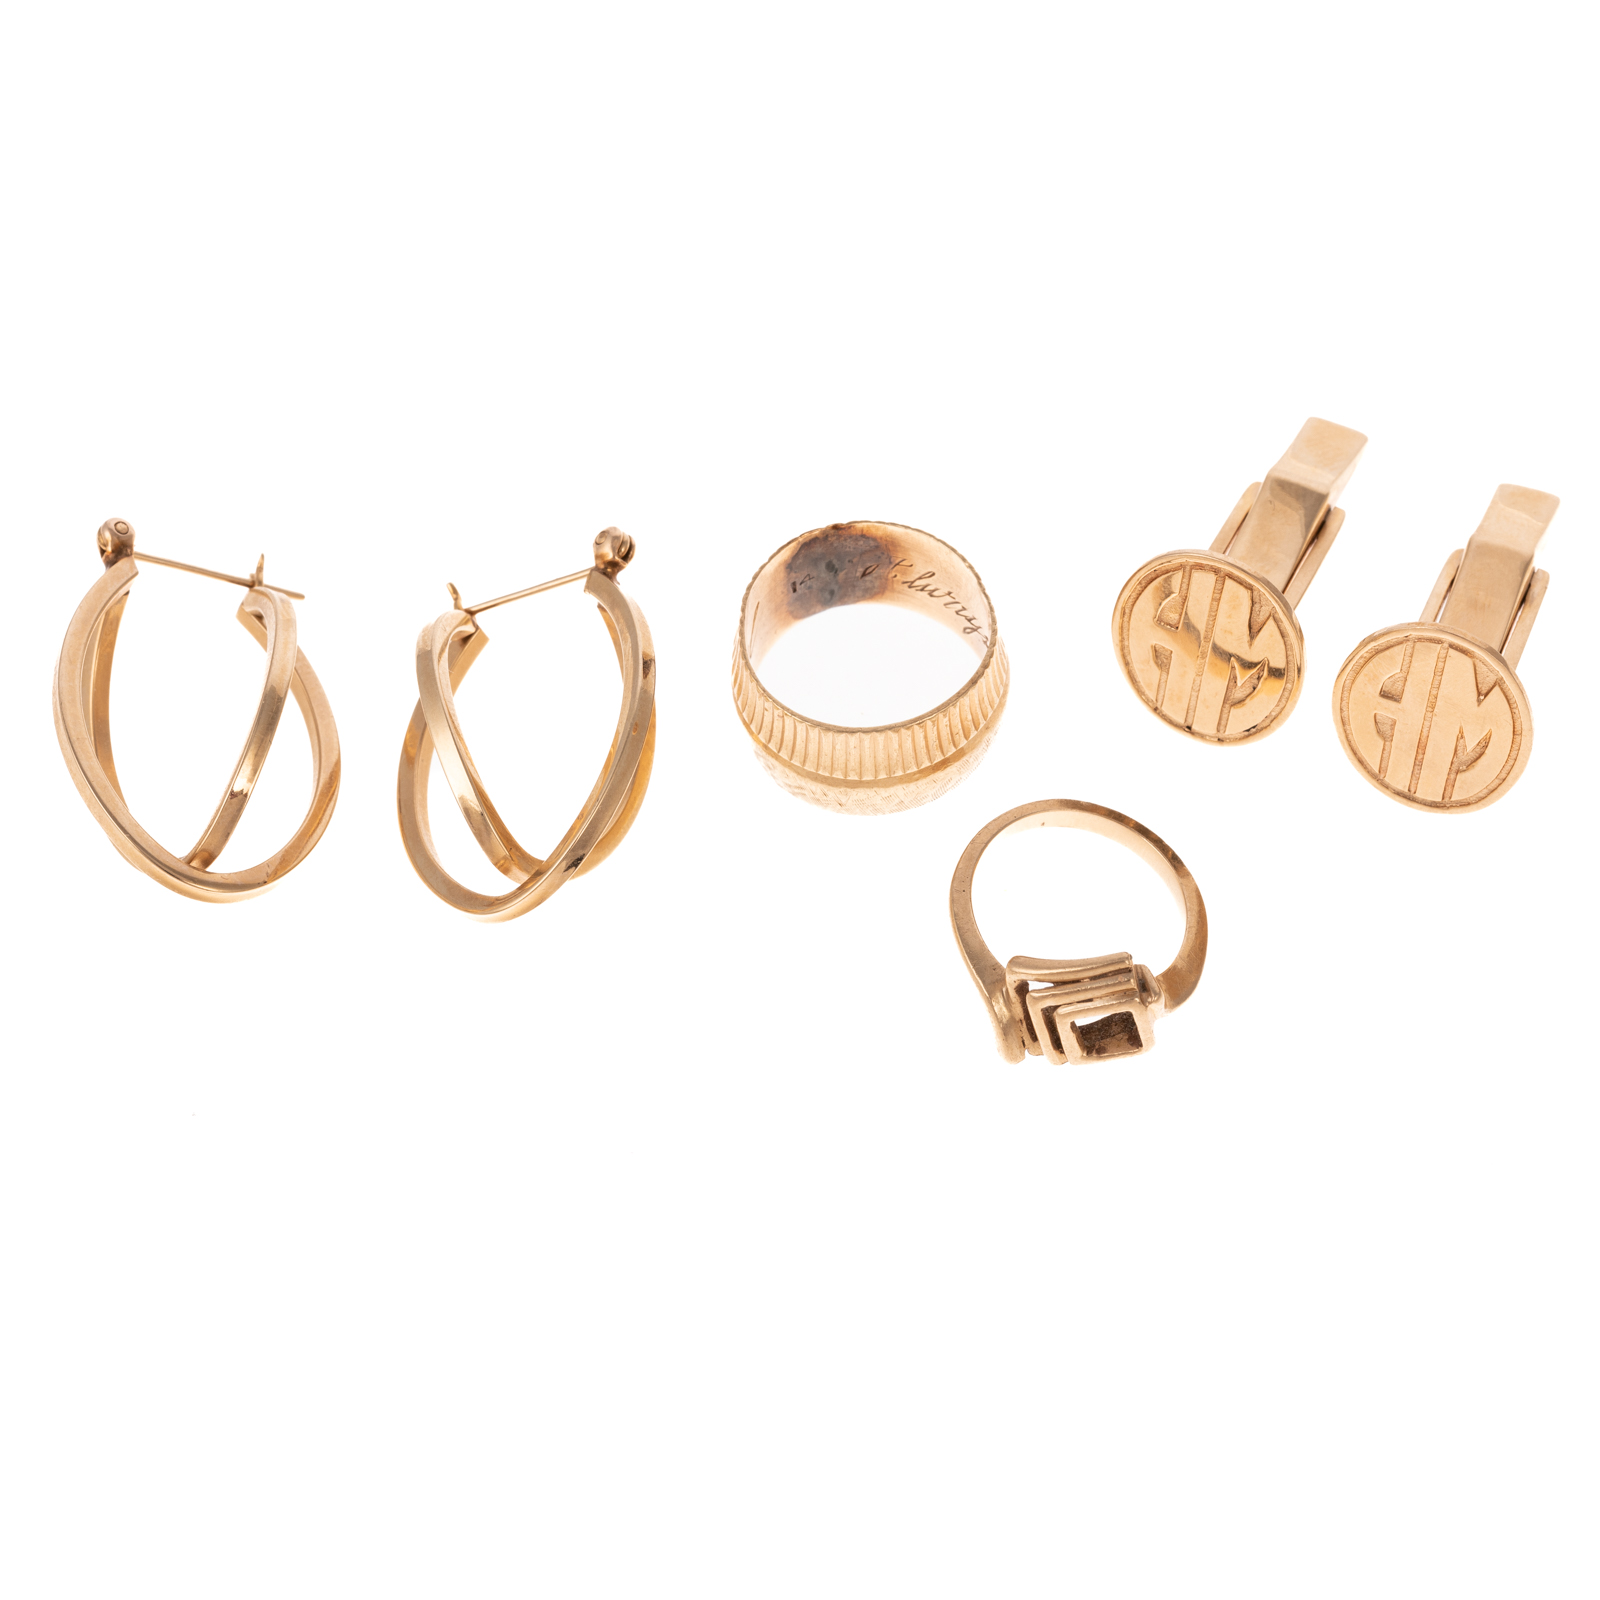 A COLLECTION OF JEWELRY IN 14K 2e8f24